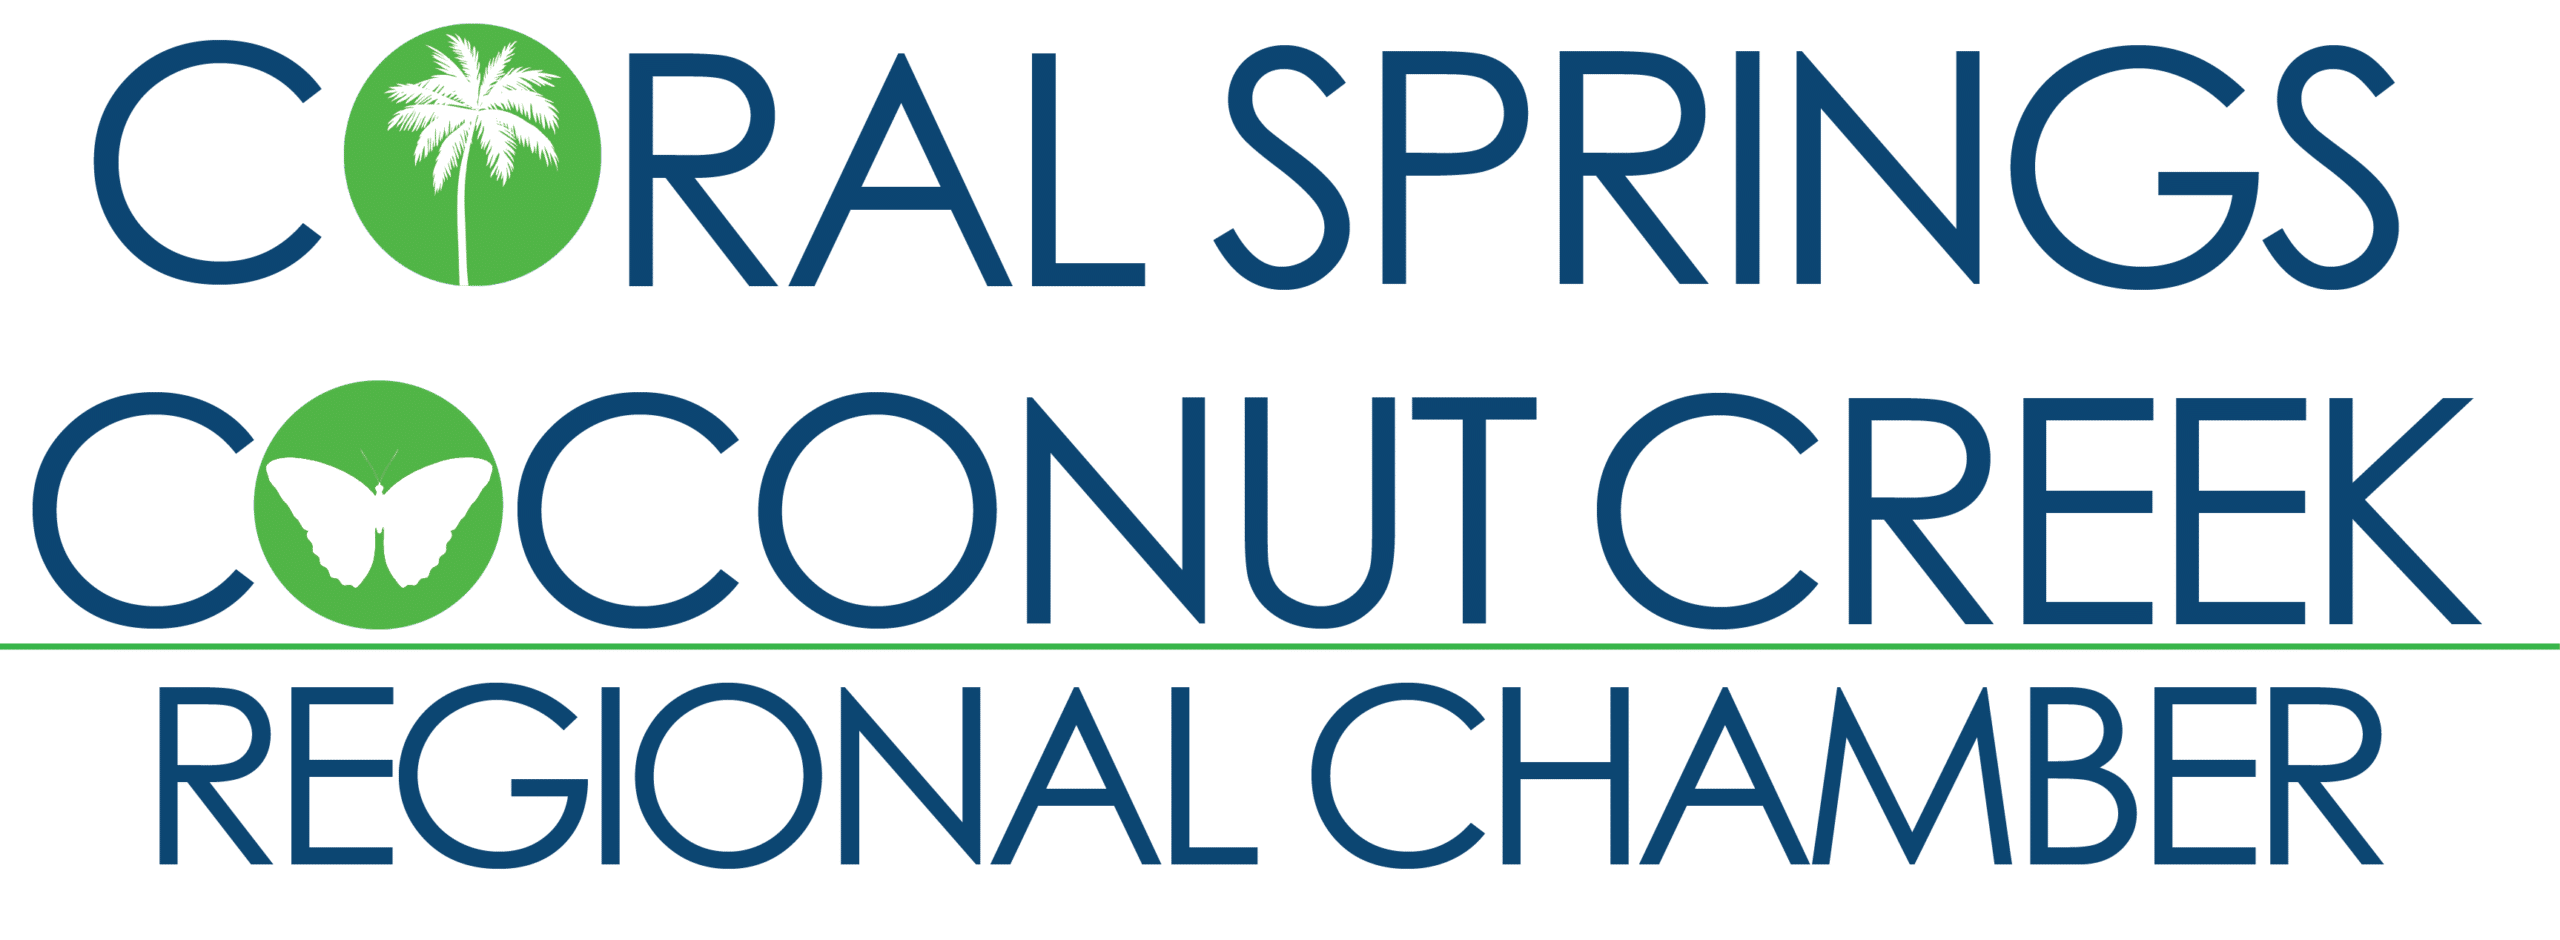 Coral Springs Coconut Creek Chamber logo